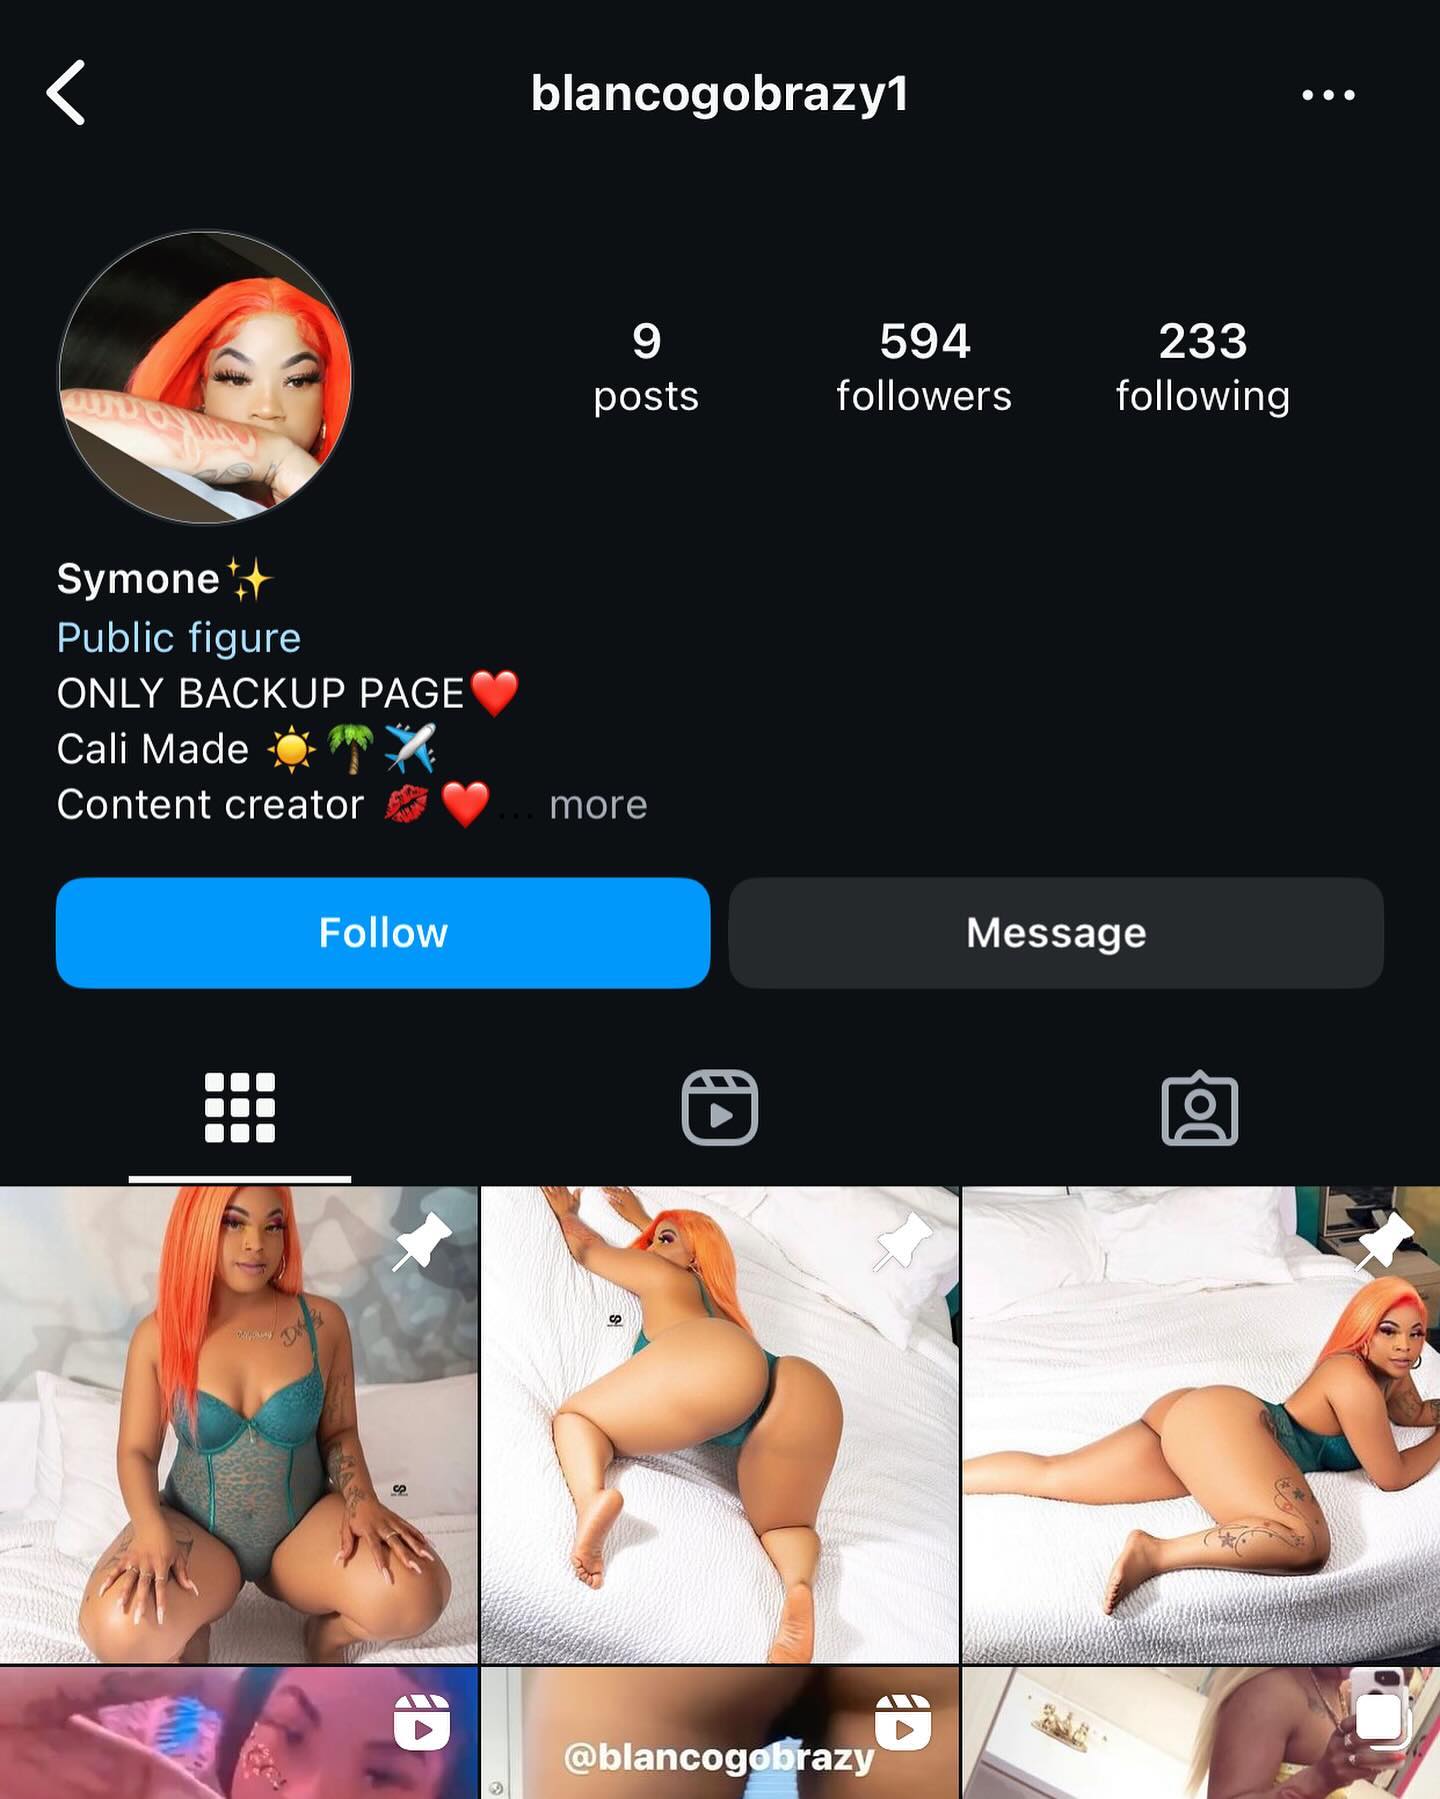 Catfish alert the @blancogobrazy1 page is not me thats a whole catfish bruh 😂😂😂 this is my only page and i have  a cooking page which is in my bio…if u see my linktree in my bio and the page isnt in there its not me i dont sell drop boxes nor do i message people to buy anything or beg them too😂😂😂tell that ho to live verify i bet u she cant because it aint me 😂😂😂😂